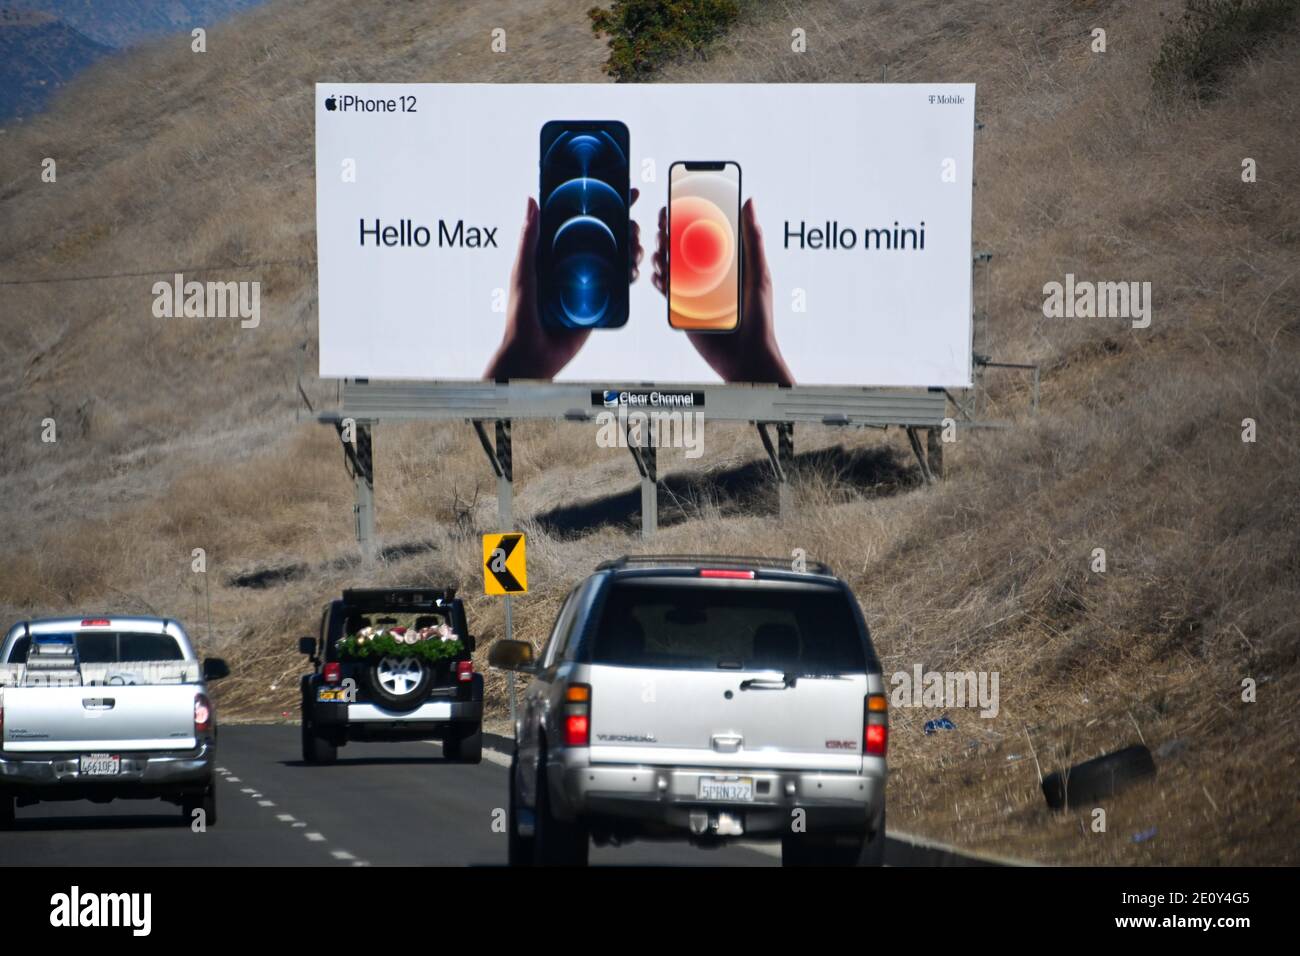 Apple iPhone 12 billboards are seen on La Brea Ave, Wednesday, Dec. 30, 2020 in Inglewood, Calif. (Dylan Stewart/Image of Sport) Stock Photo